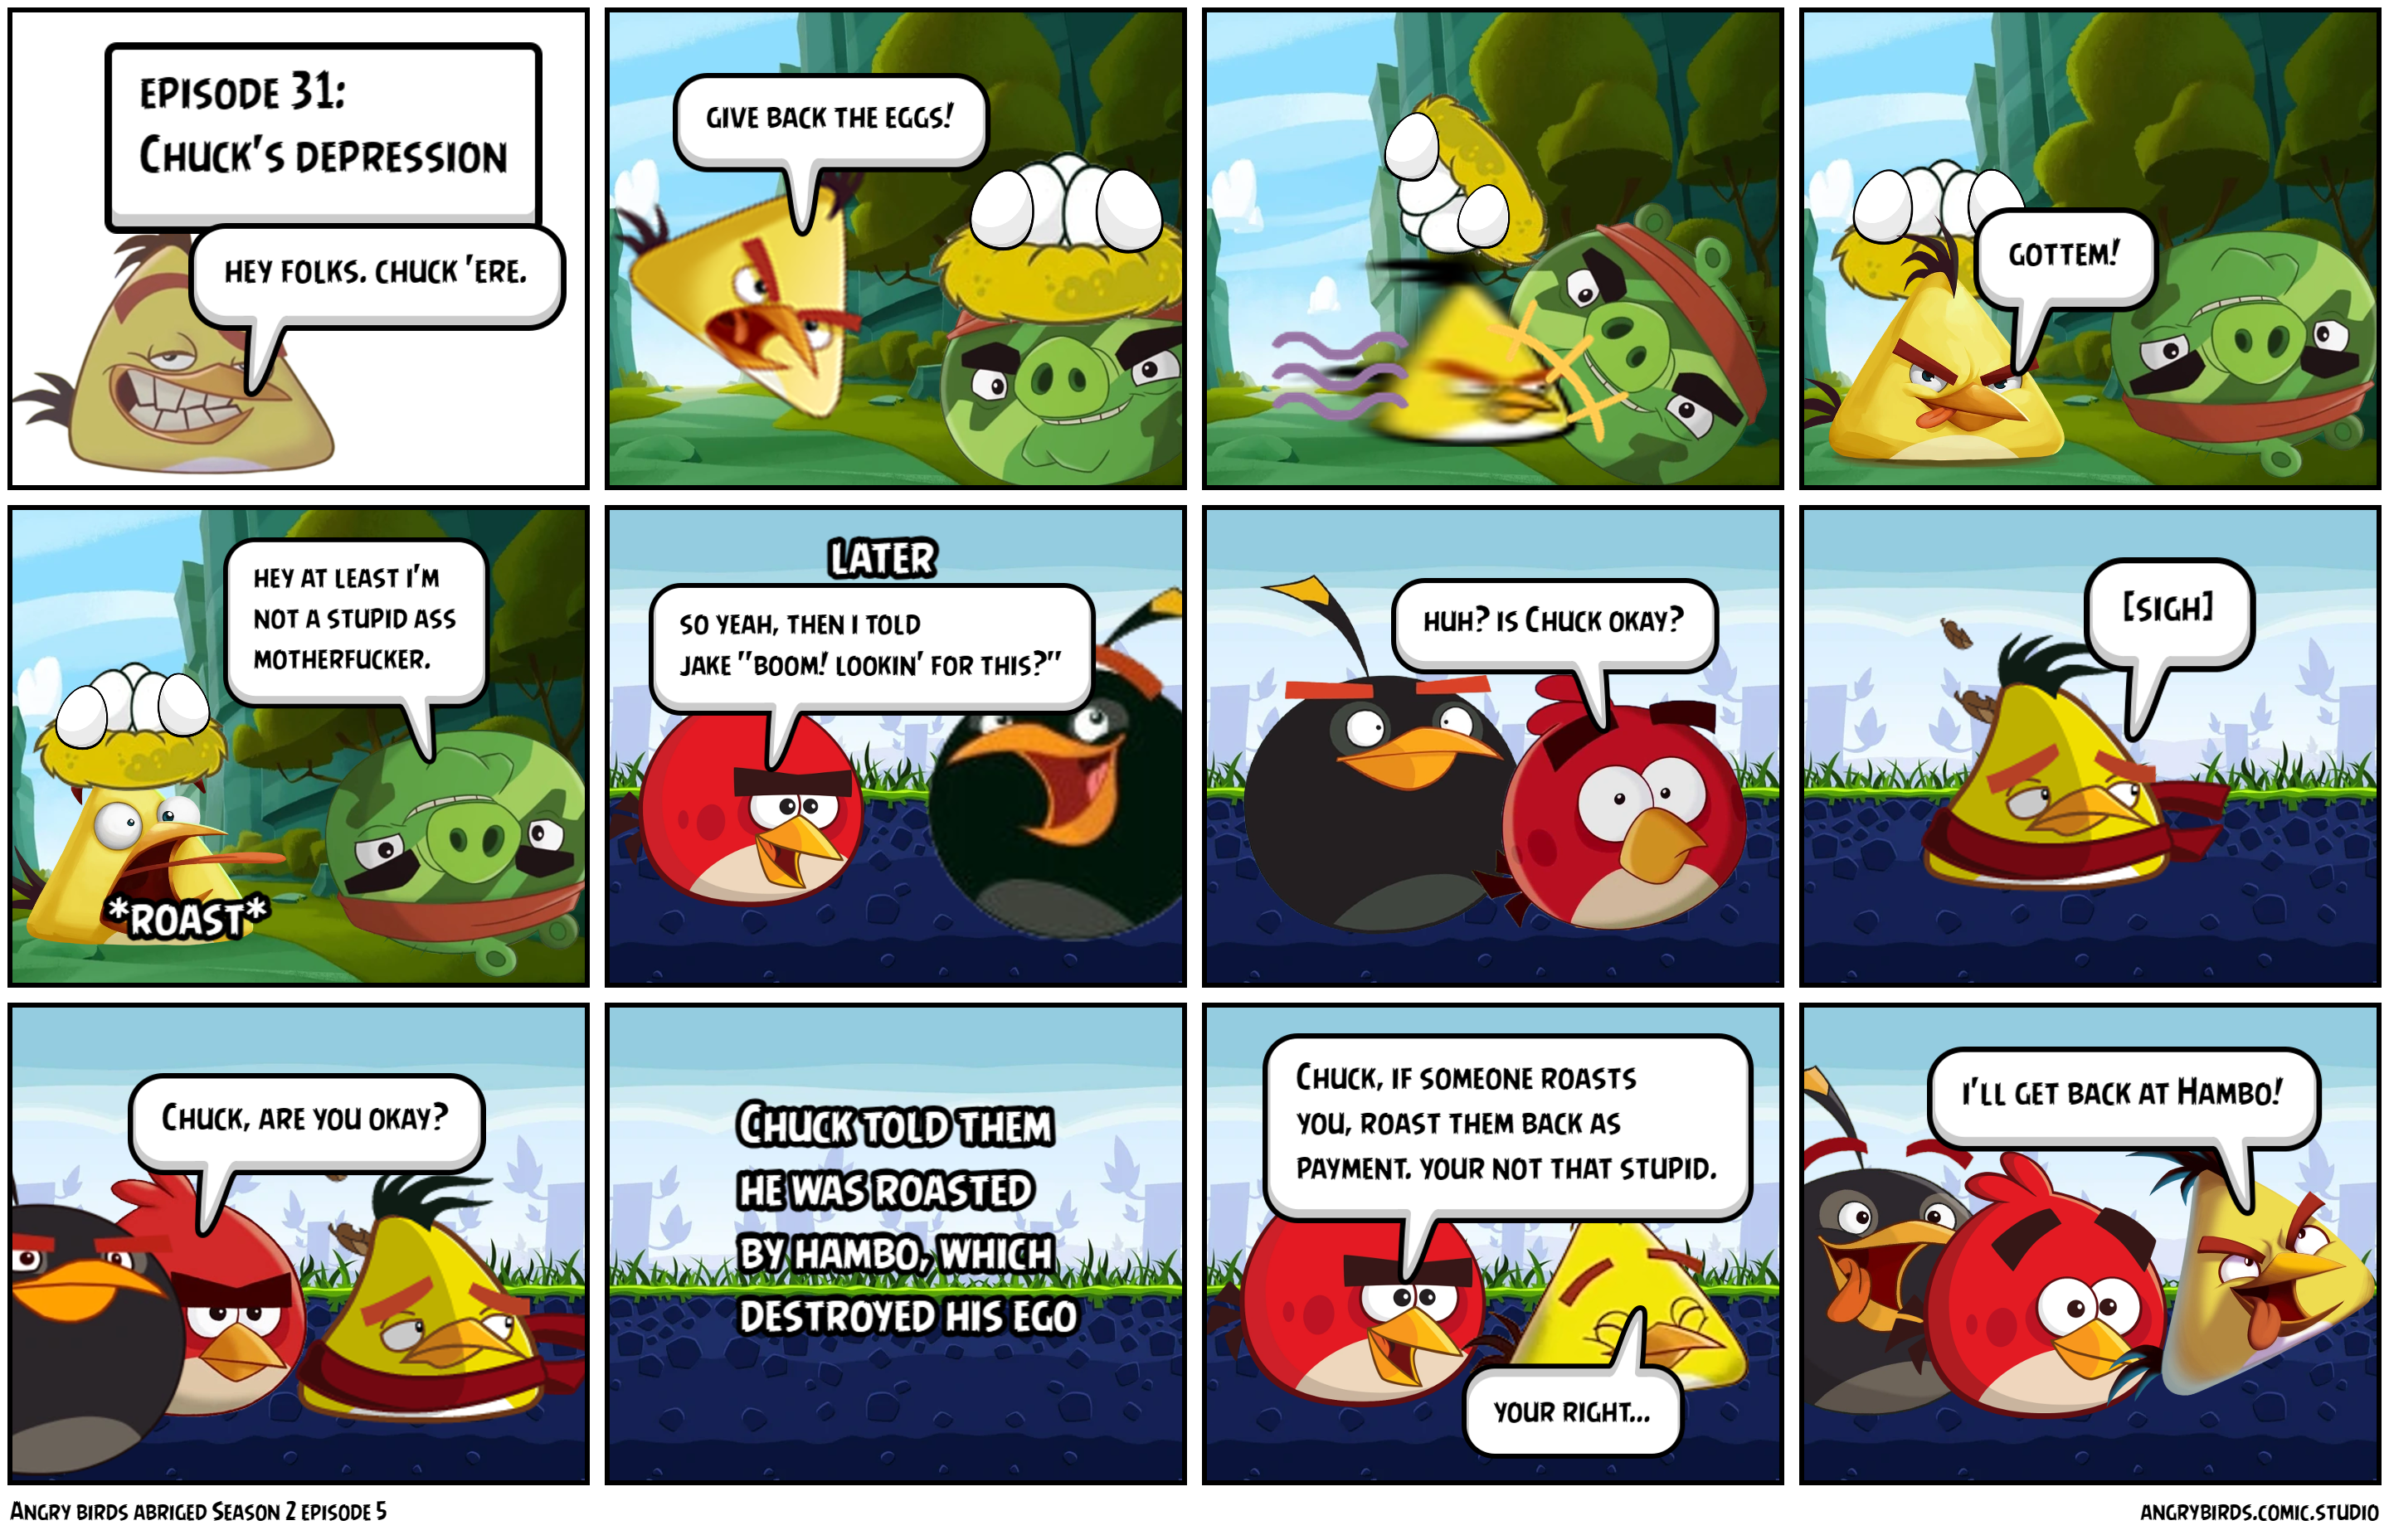 Angry birds abriged Season 2 episode 5